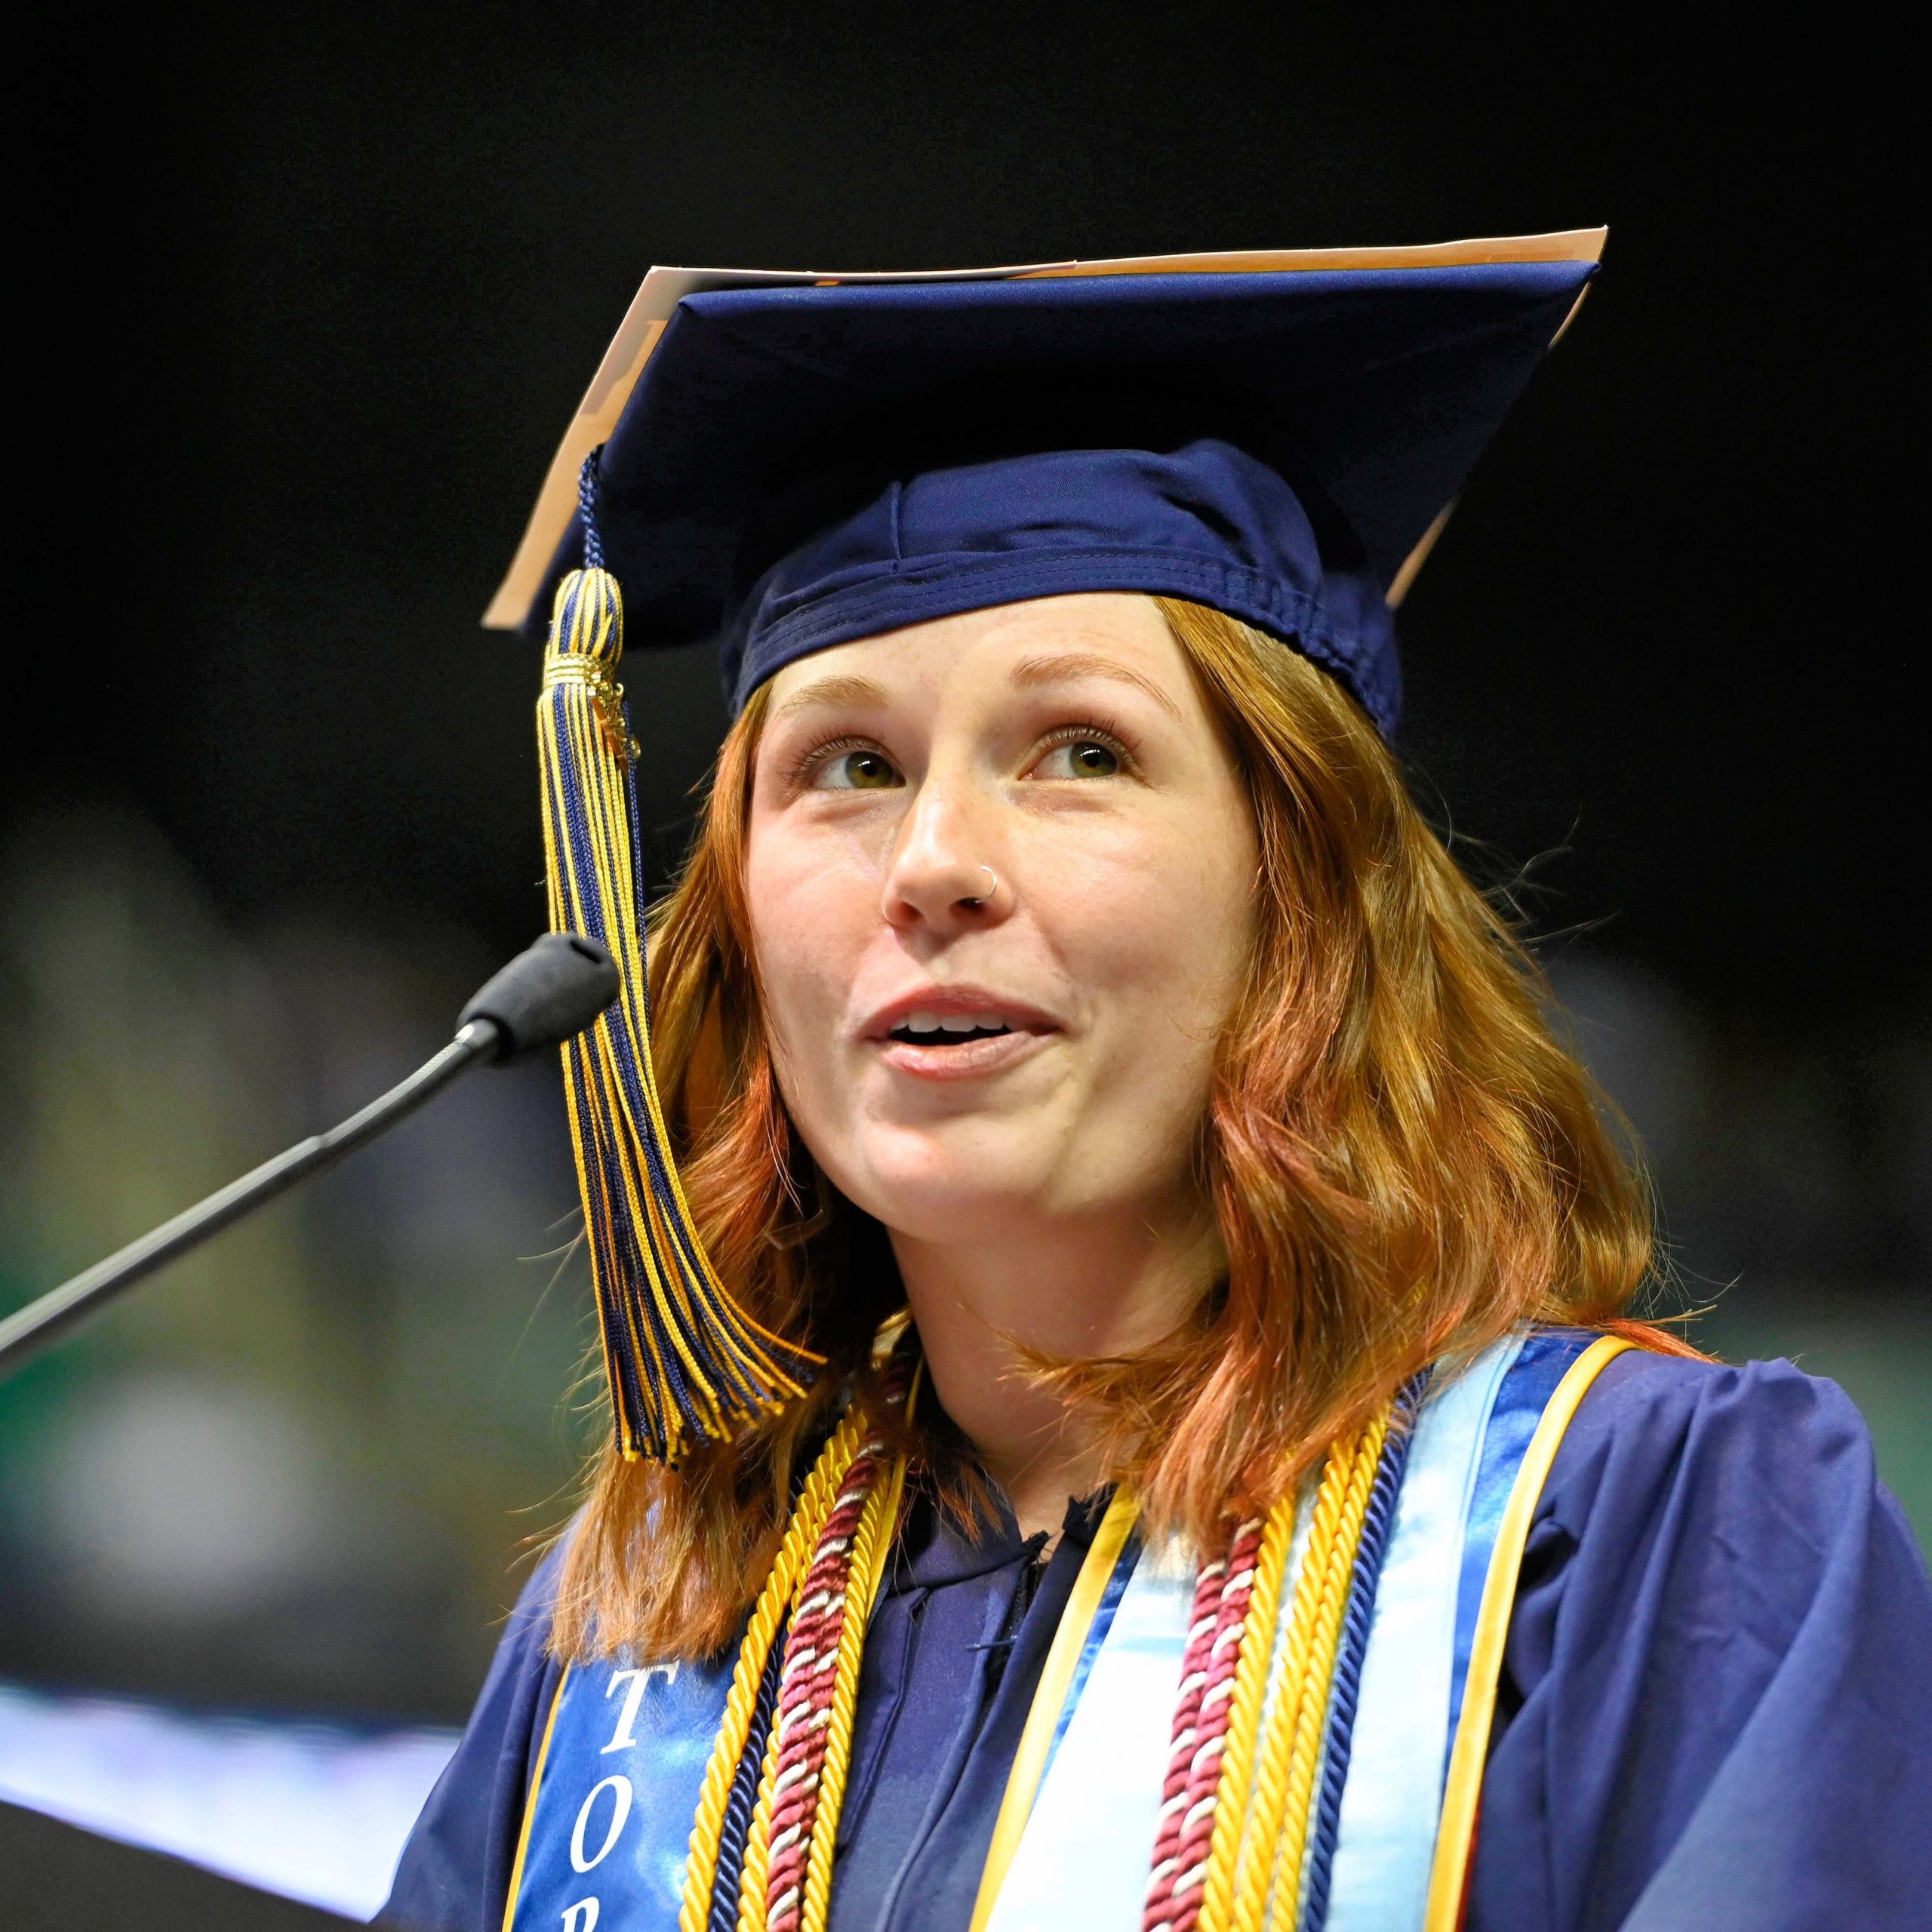 red haired girl in cap and gown speaks at podium